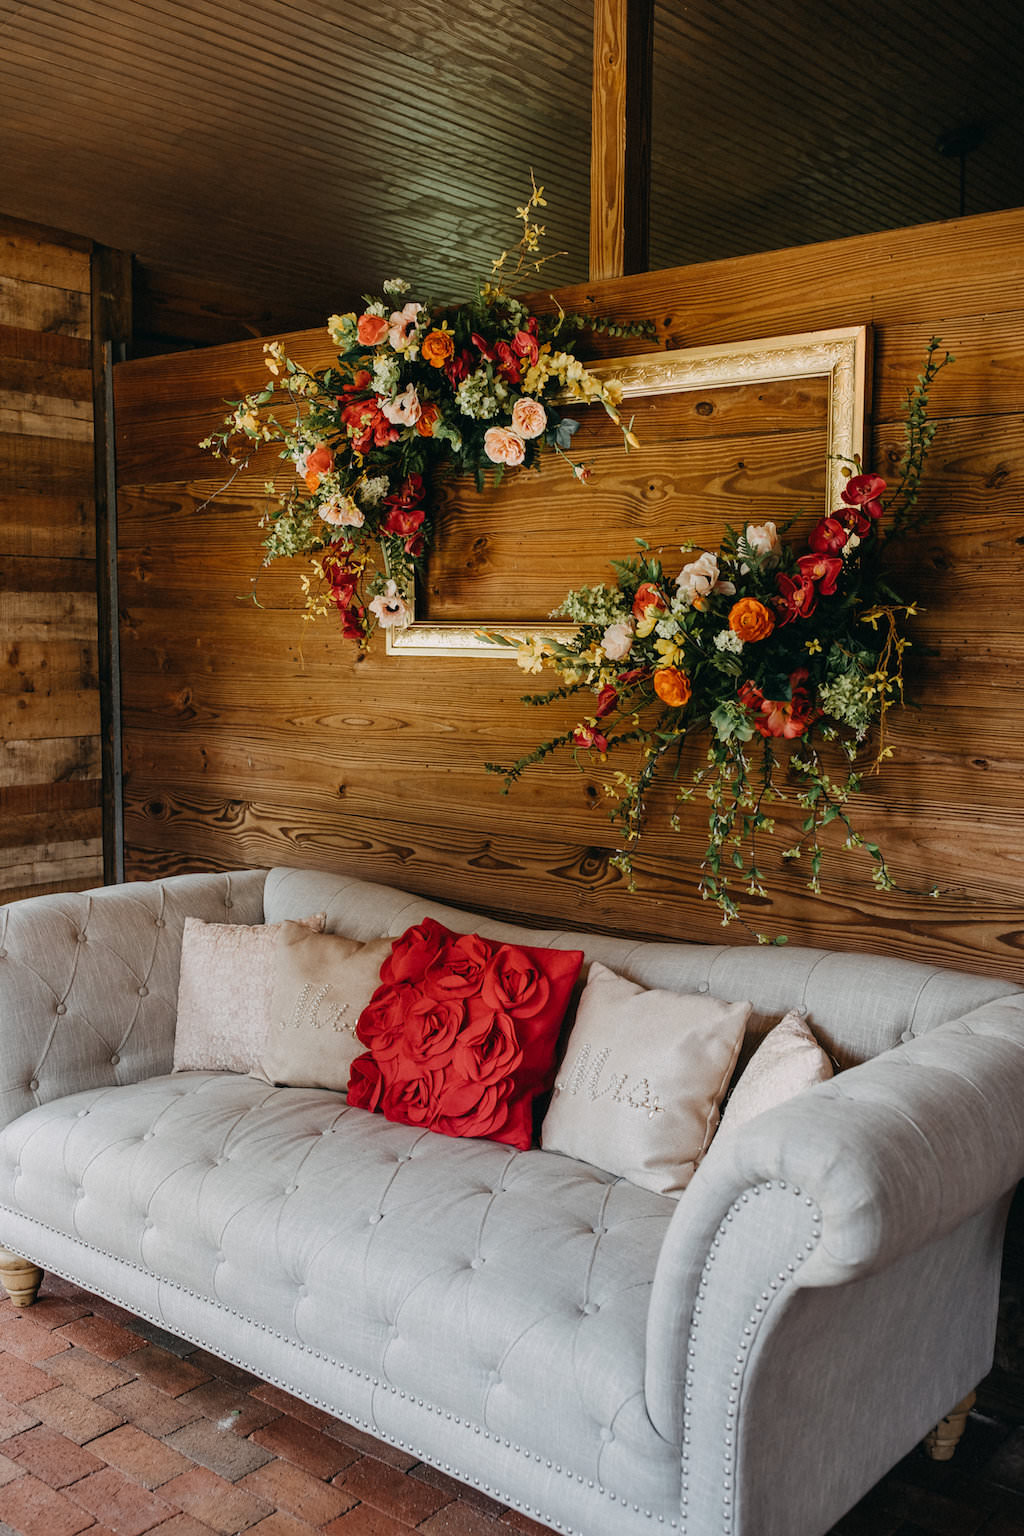 Rustic Tropical Wedding Reception Lounge Seating Decor, Grey Couch with Pillows, Wooden Backdrop, Gold Frame with Tropical Floral Bouquets | Tampa Bay Photographer Rad Red Creative | Rustic Venue Cross Creek Ranch